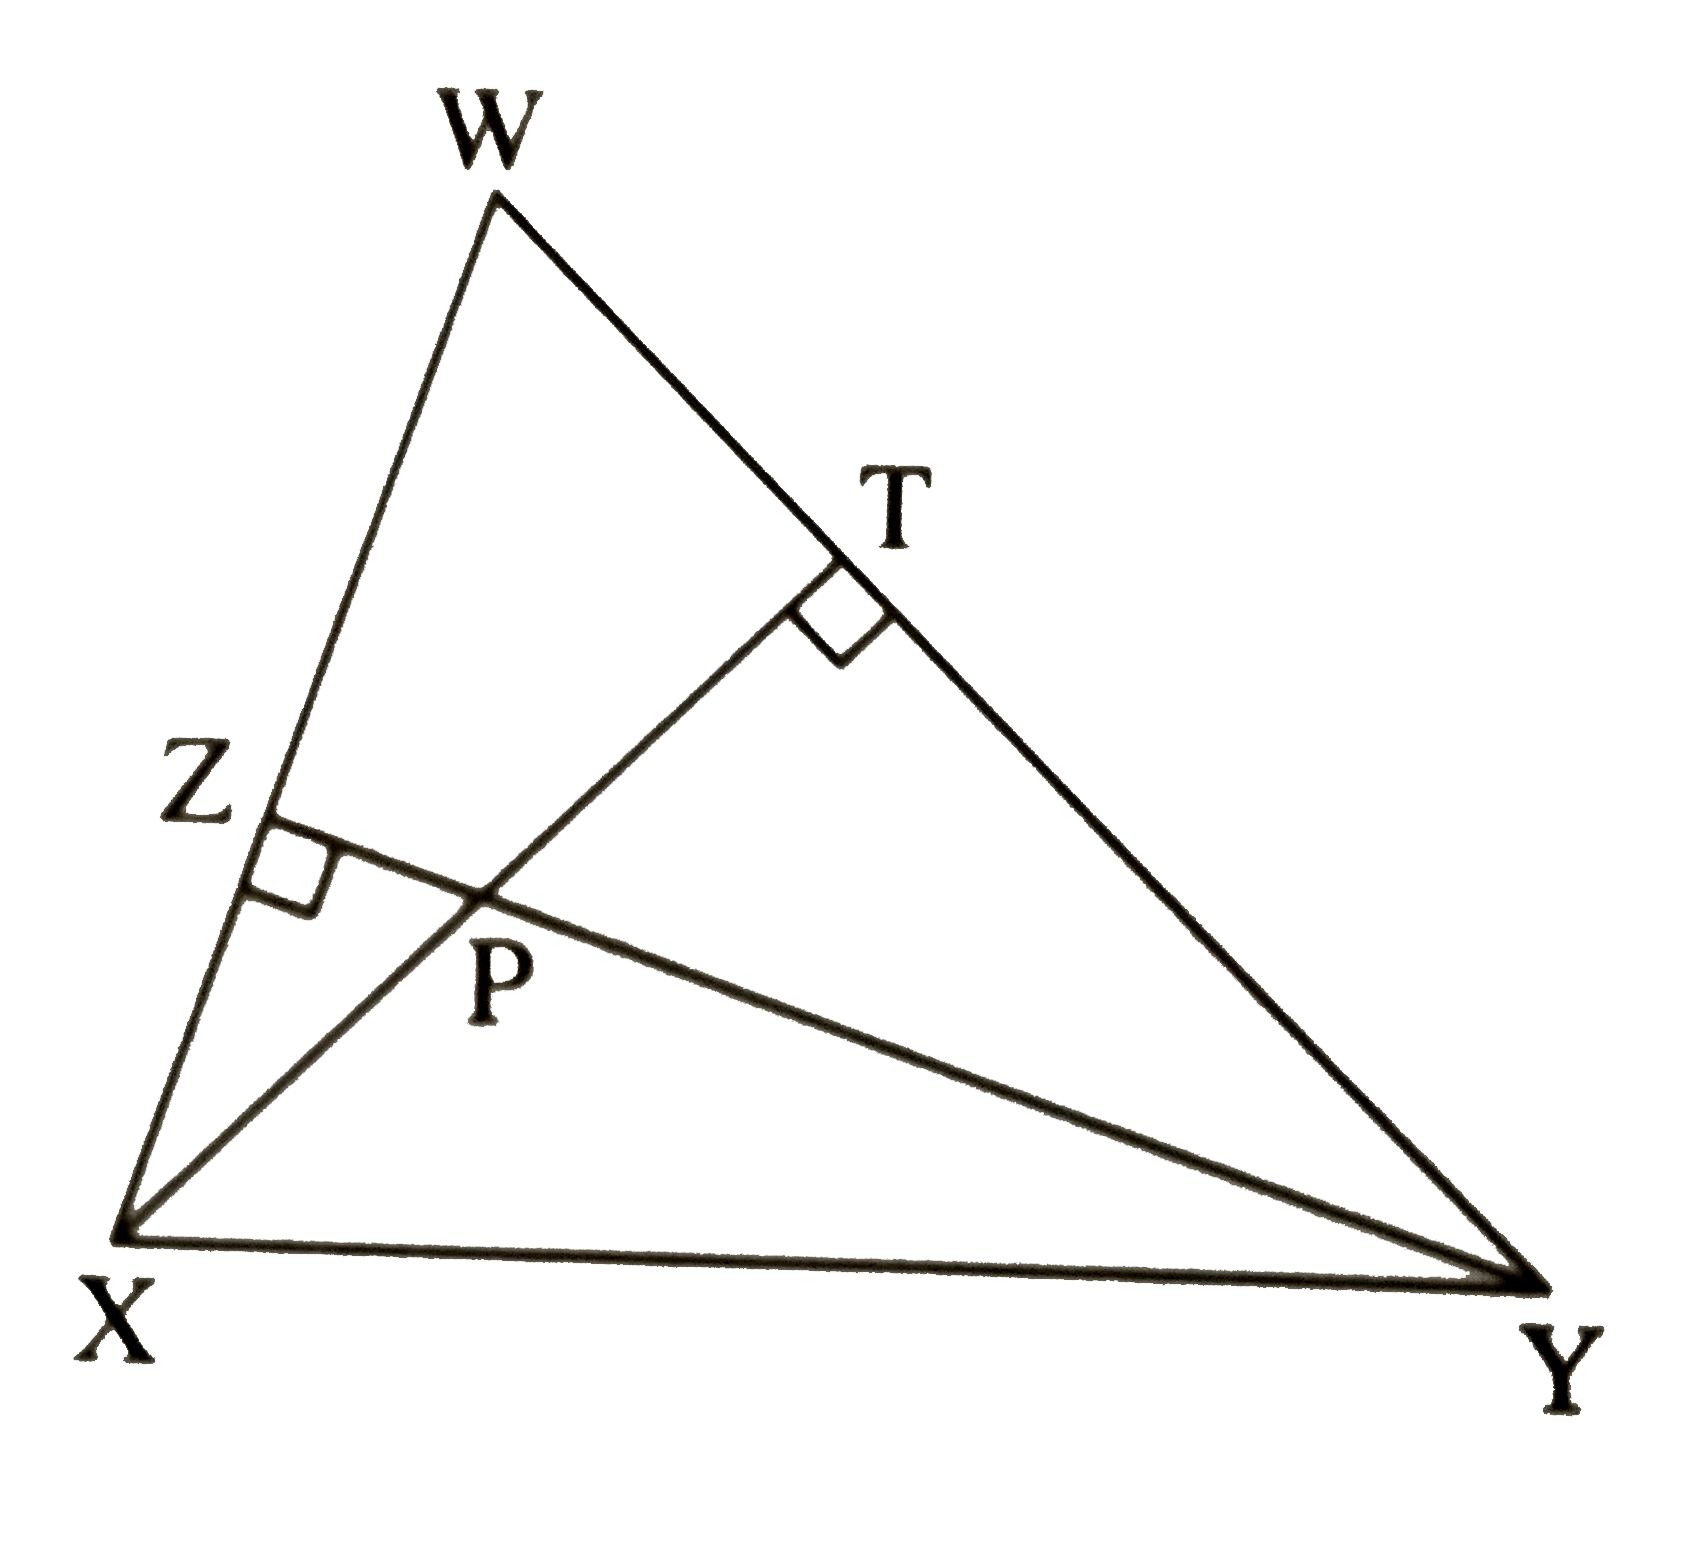 In figure, altitudes YZ and XT of triangle WXY intersect  at P. Prove that   Points X,Z,T,Y are concyclic.